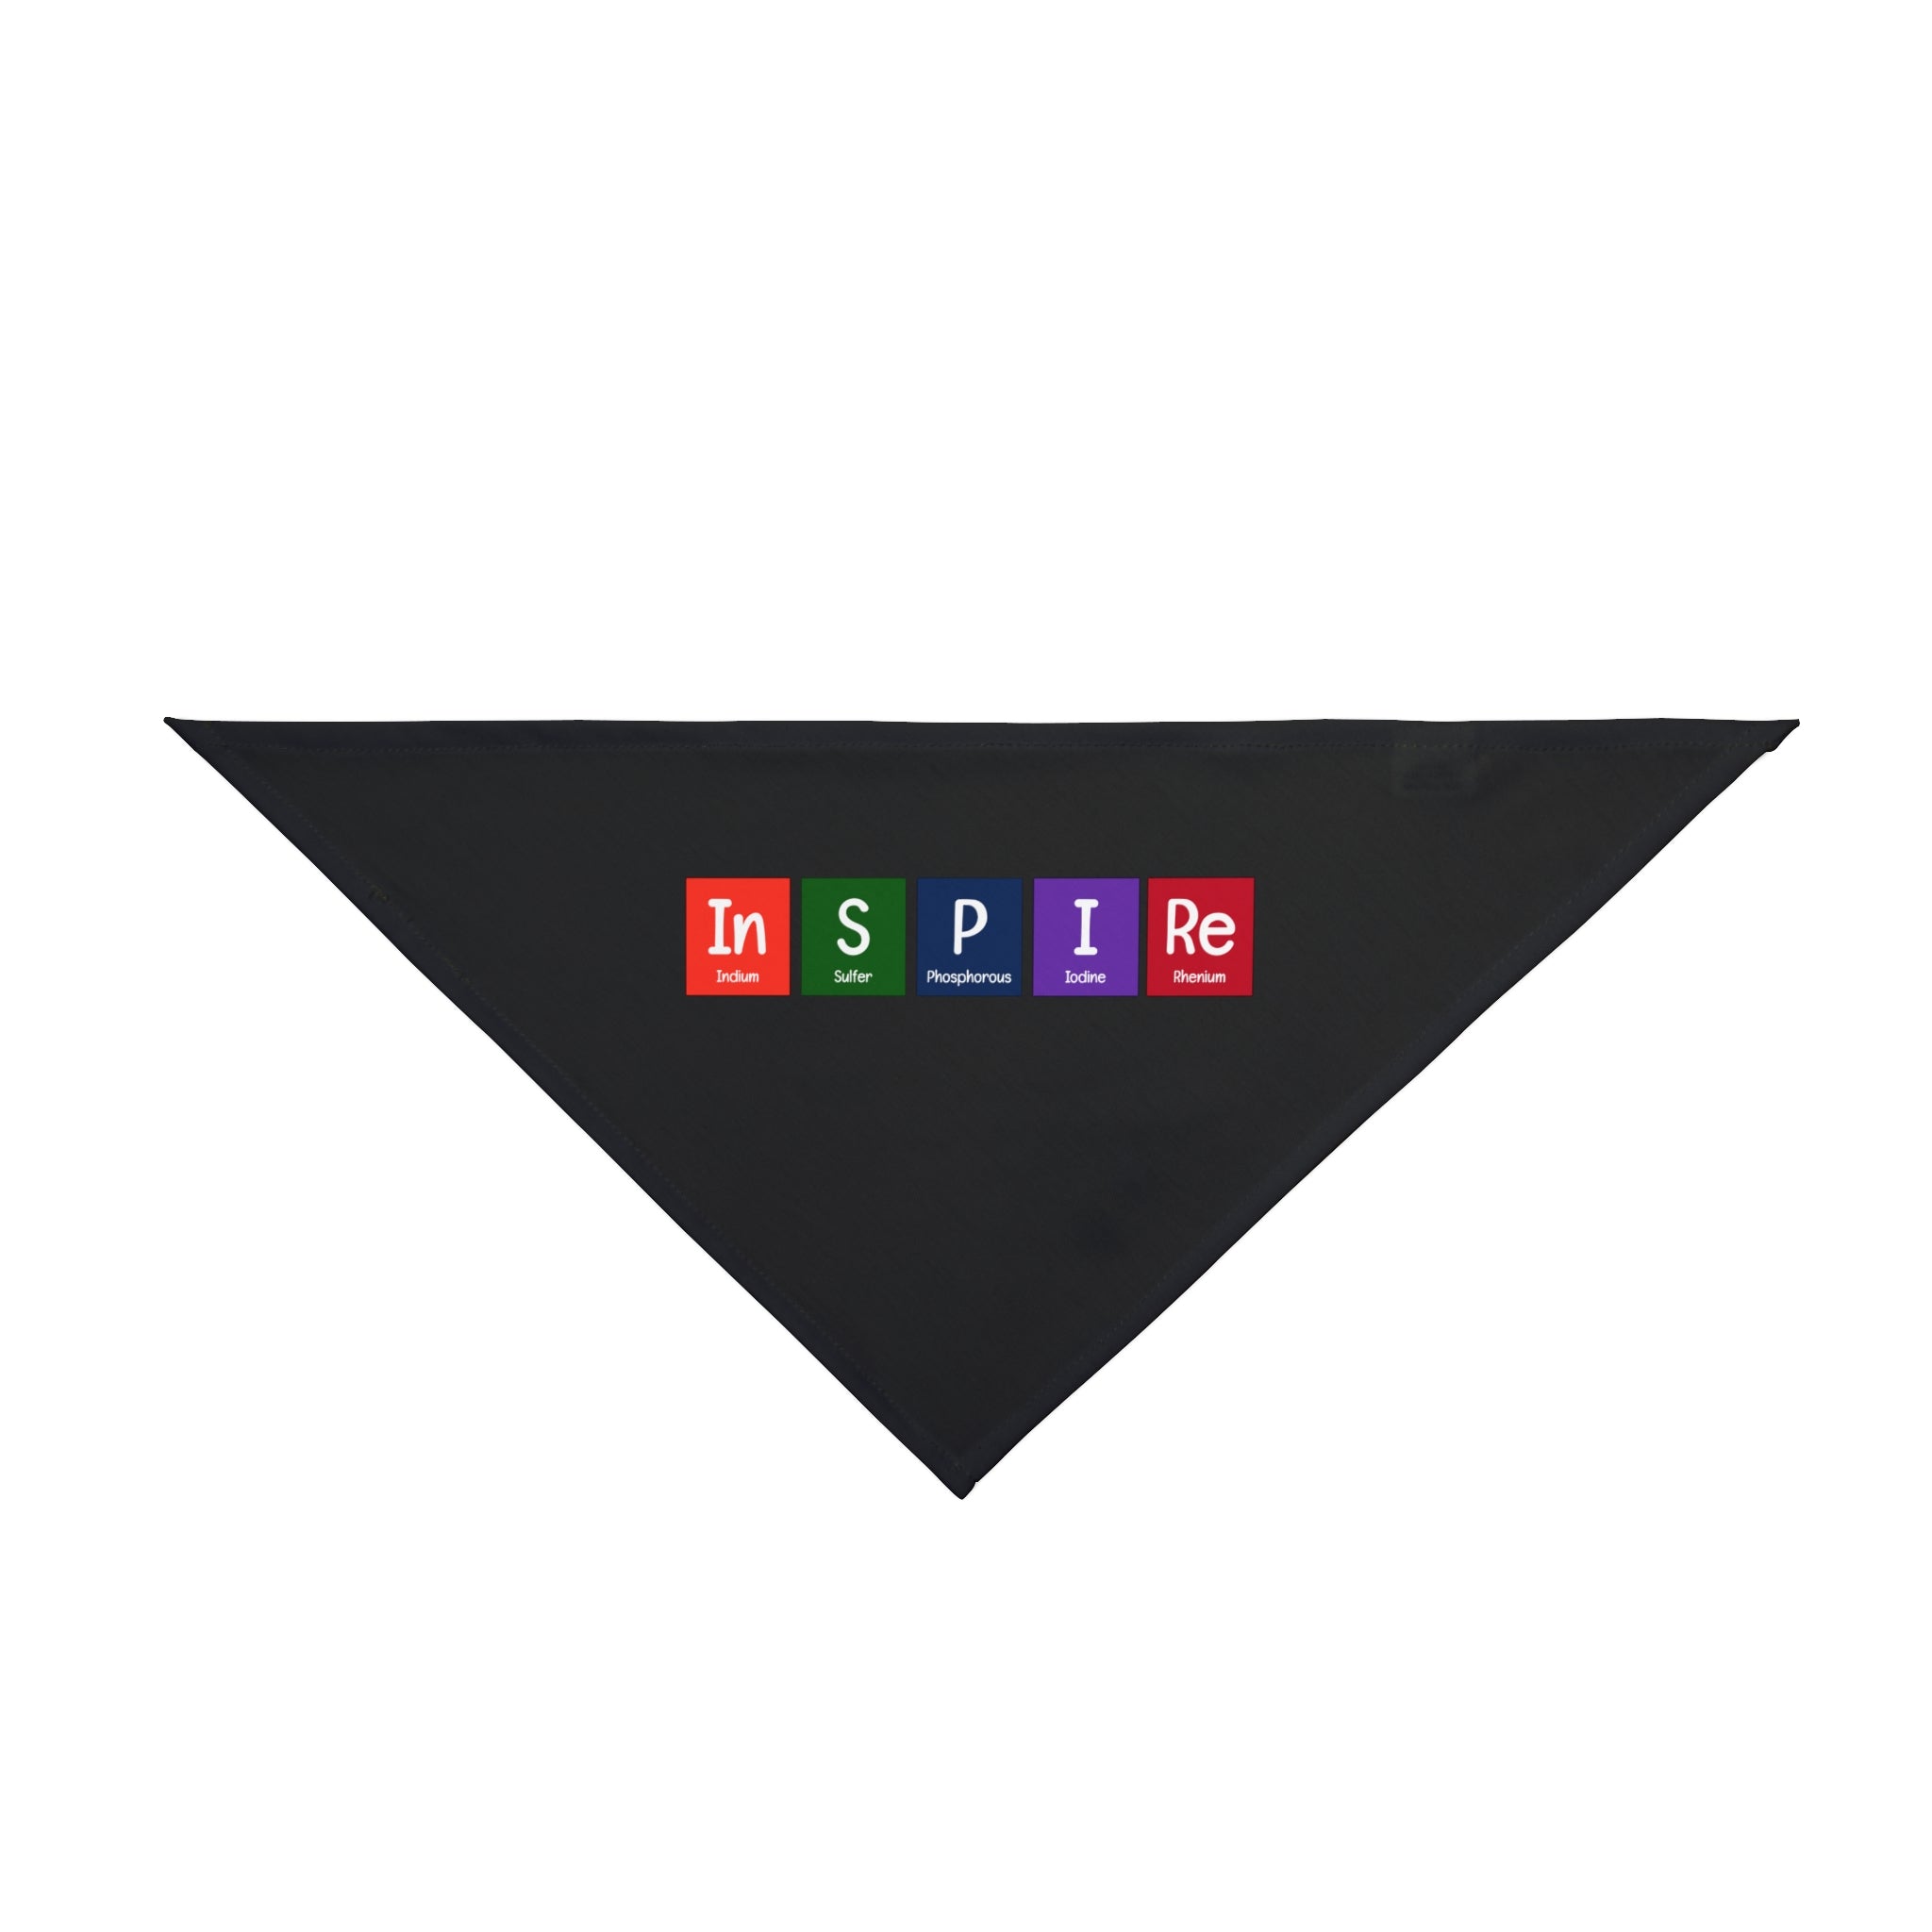 In-S-P-I-Re - Pet Bandana: Black triangular cloth with the word "INSPIRE" written in a design resembling periodic table elements: Indium, Sulfur, Phosphorus, Iodine, Rhenium. Soft-spun polyester crafted into an In-S-P-I-Re - Pet Bandana adds a unique touch to your pet's style.